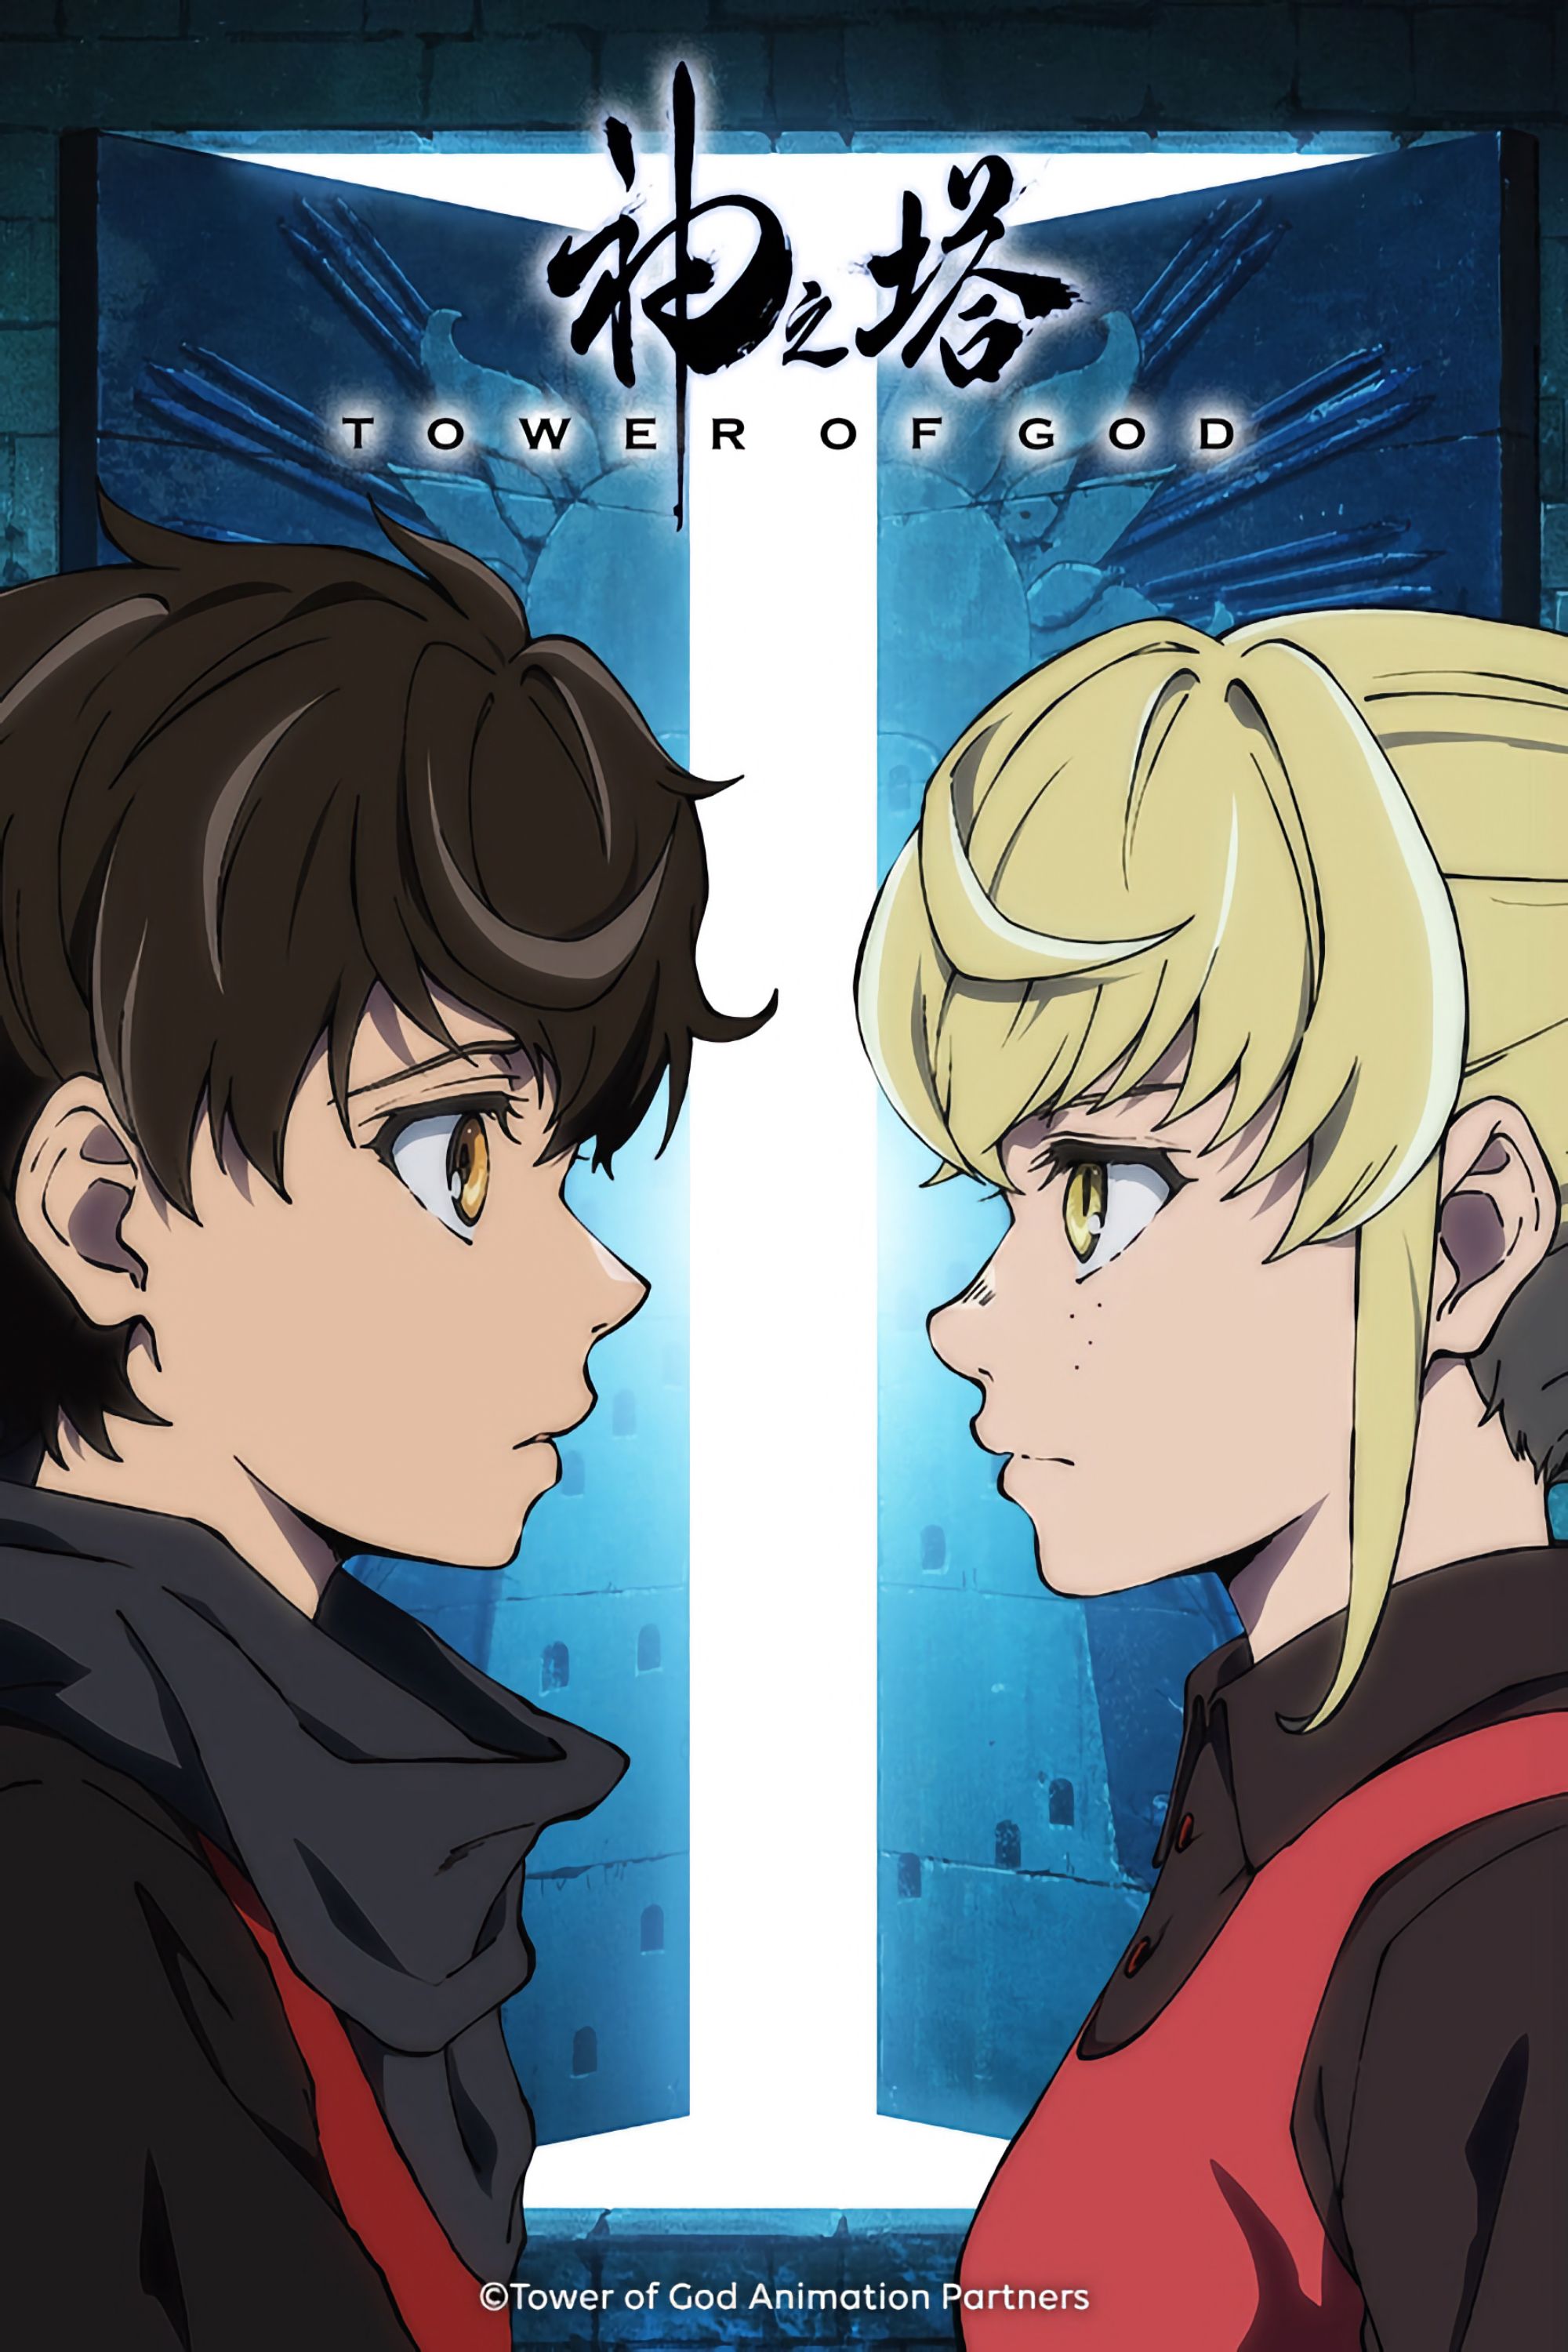 New Tower of God Season 2 Trailer And Visual Reveals July 2024 Debut -  Anime Explained